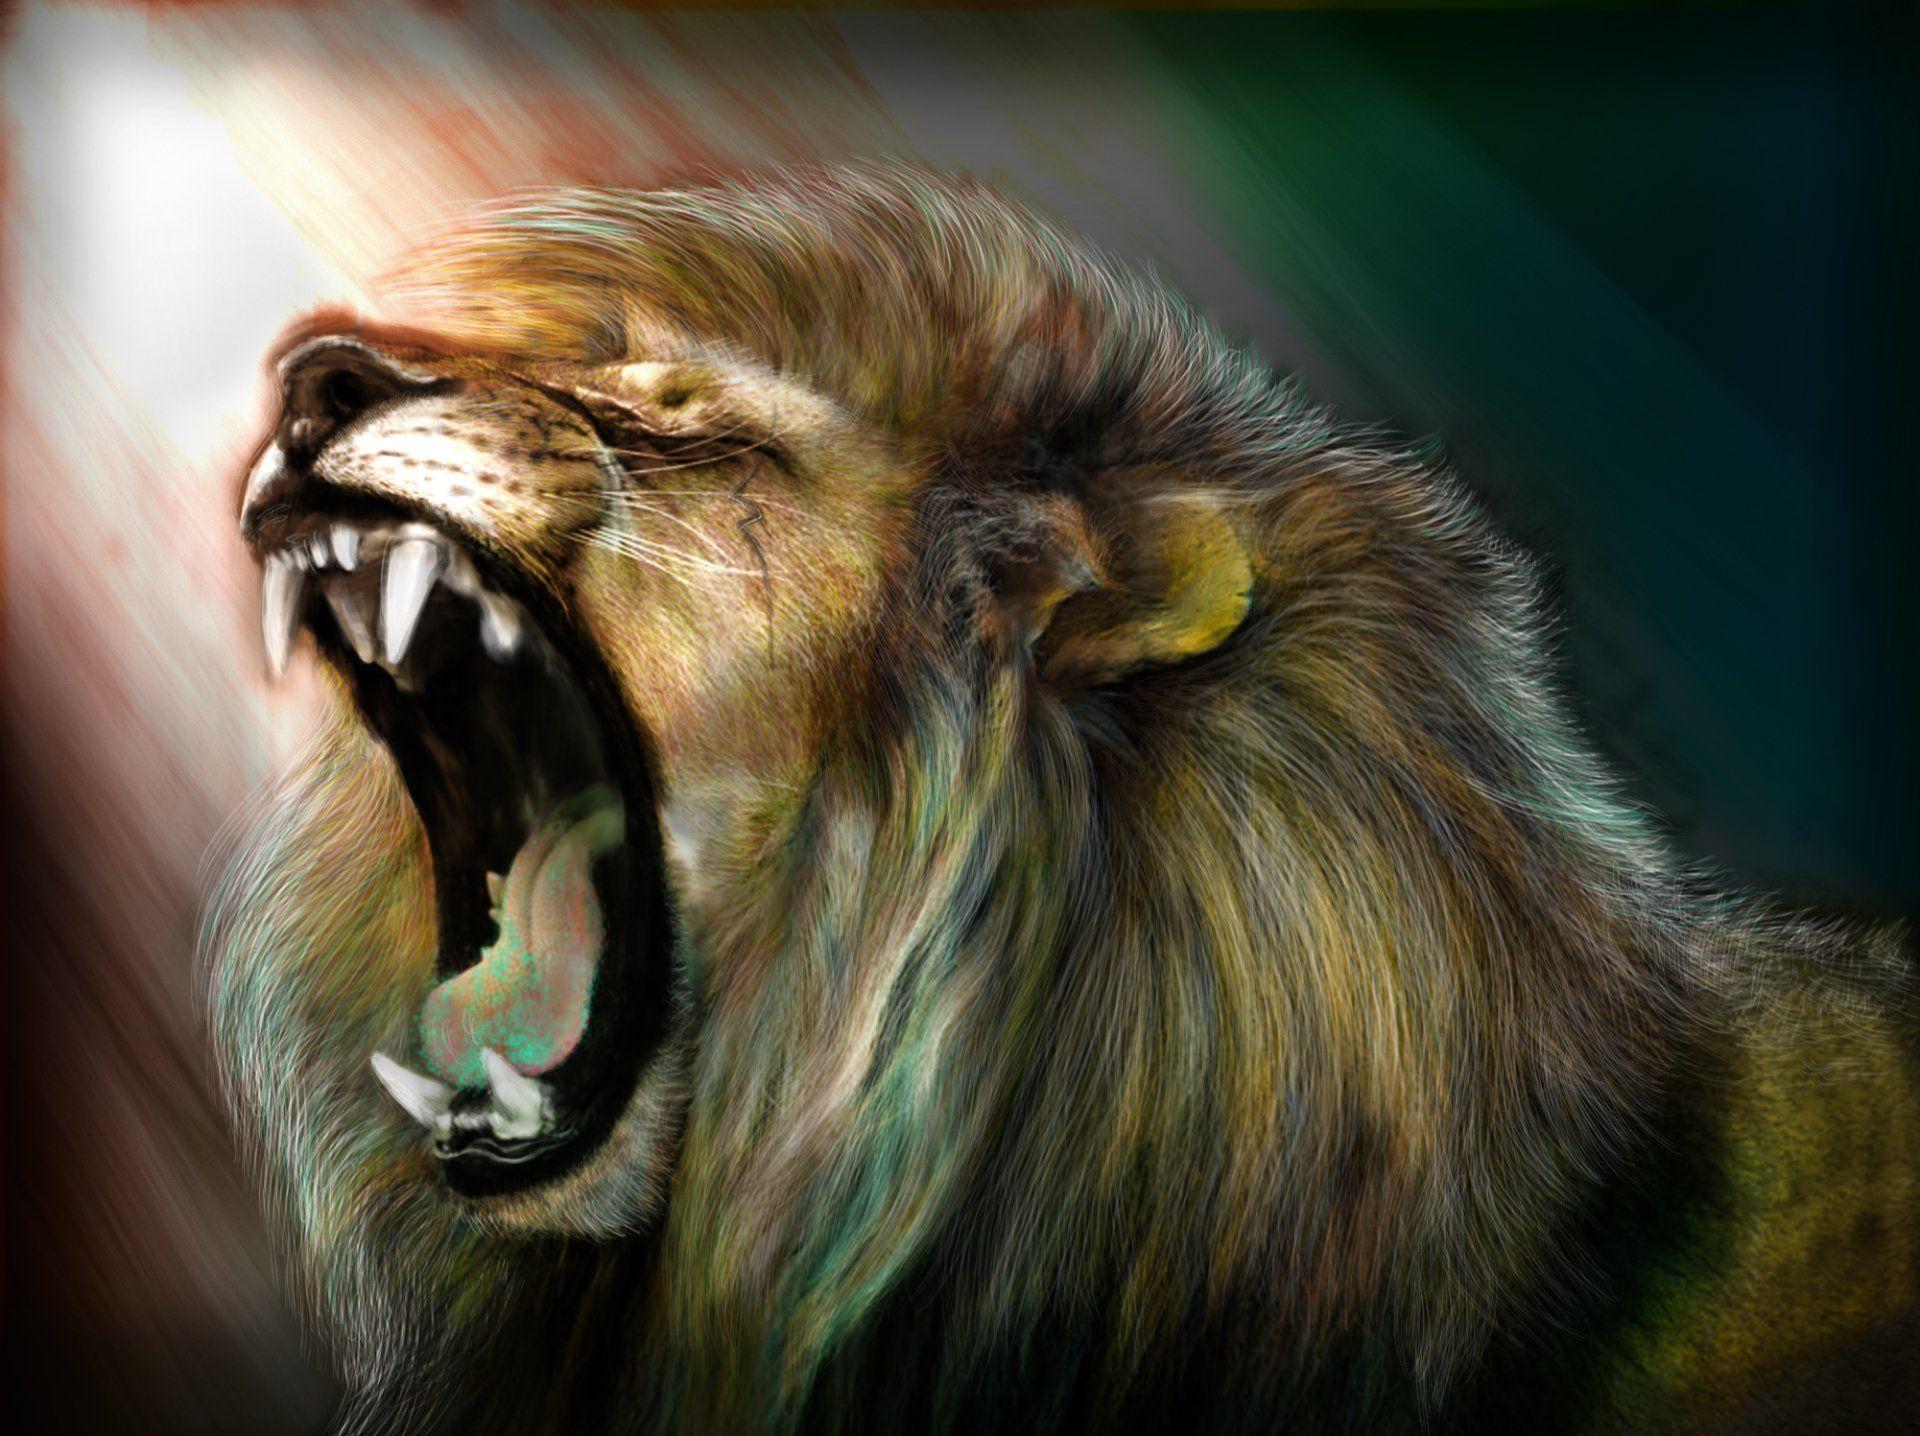 Angry Lion Face Live Wallpaper - free download